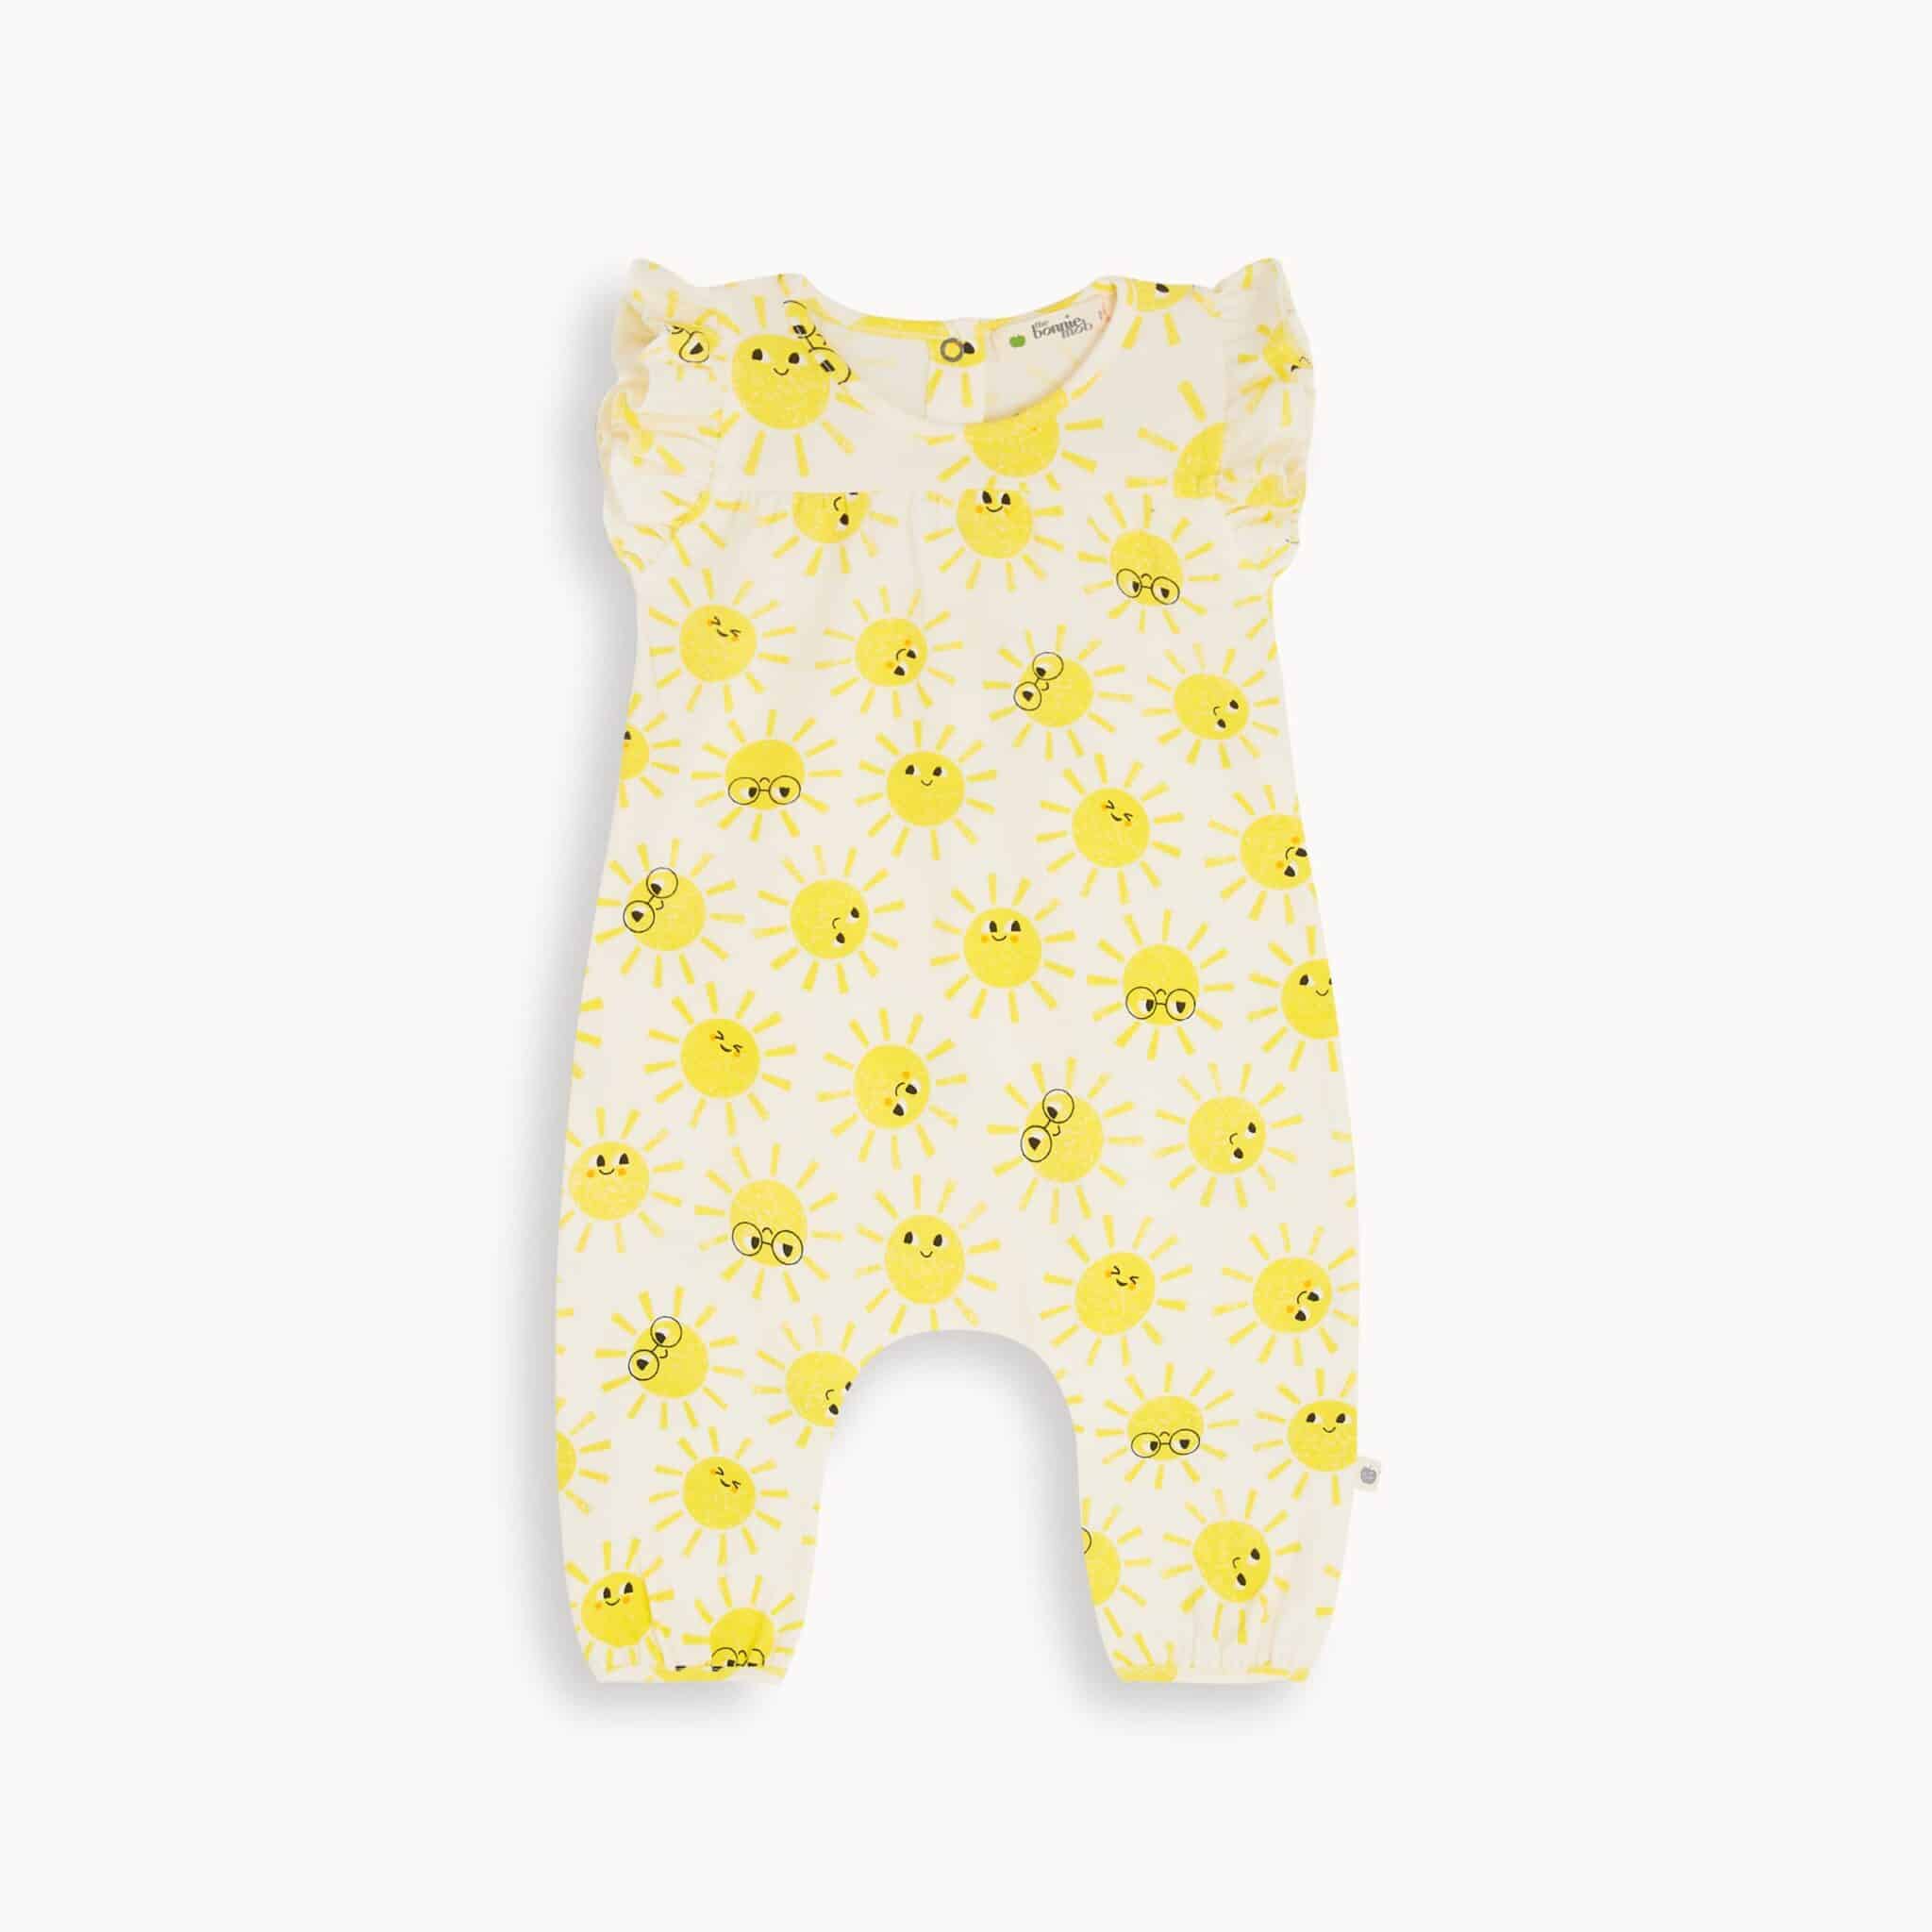 The Bonnie mob sunshine summer baby outfit